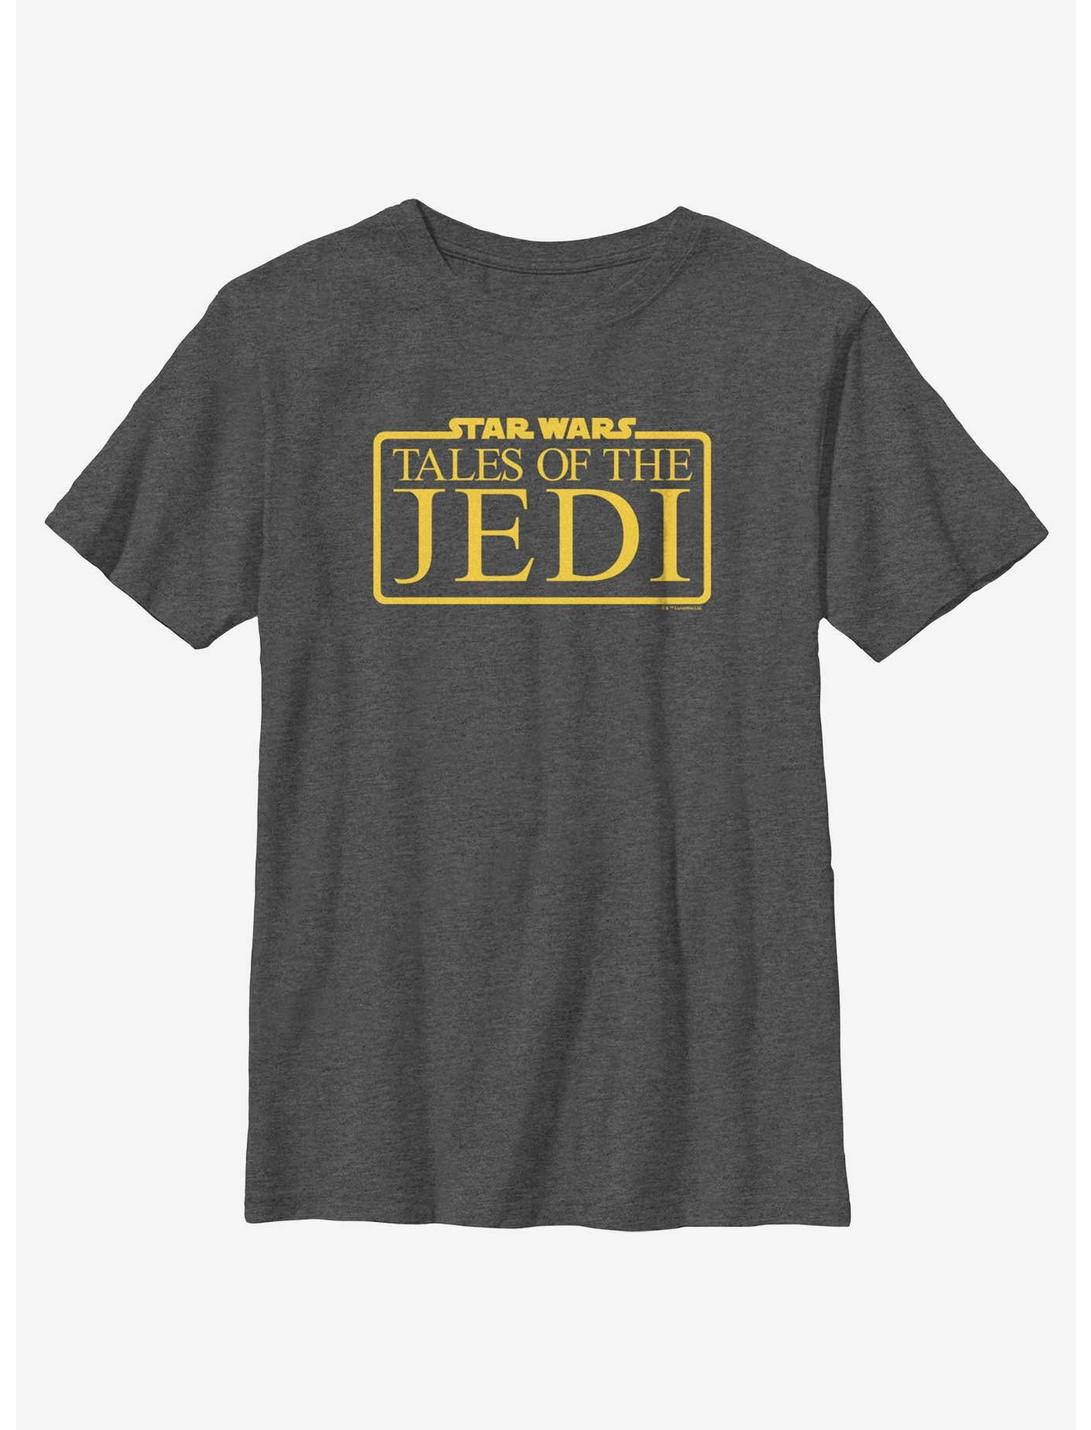 Star Wars: Tales of the Jedi Logo Youth T-Shirt, CHAR HTR, hi-res